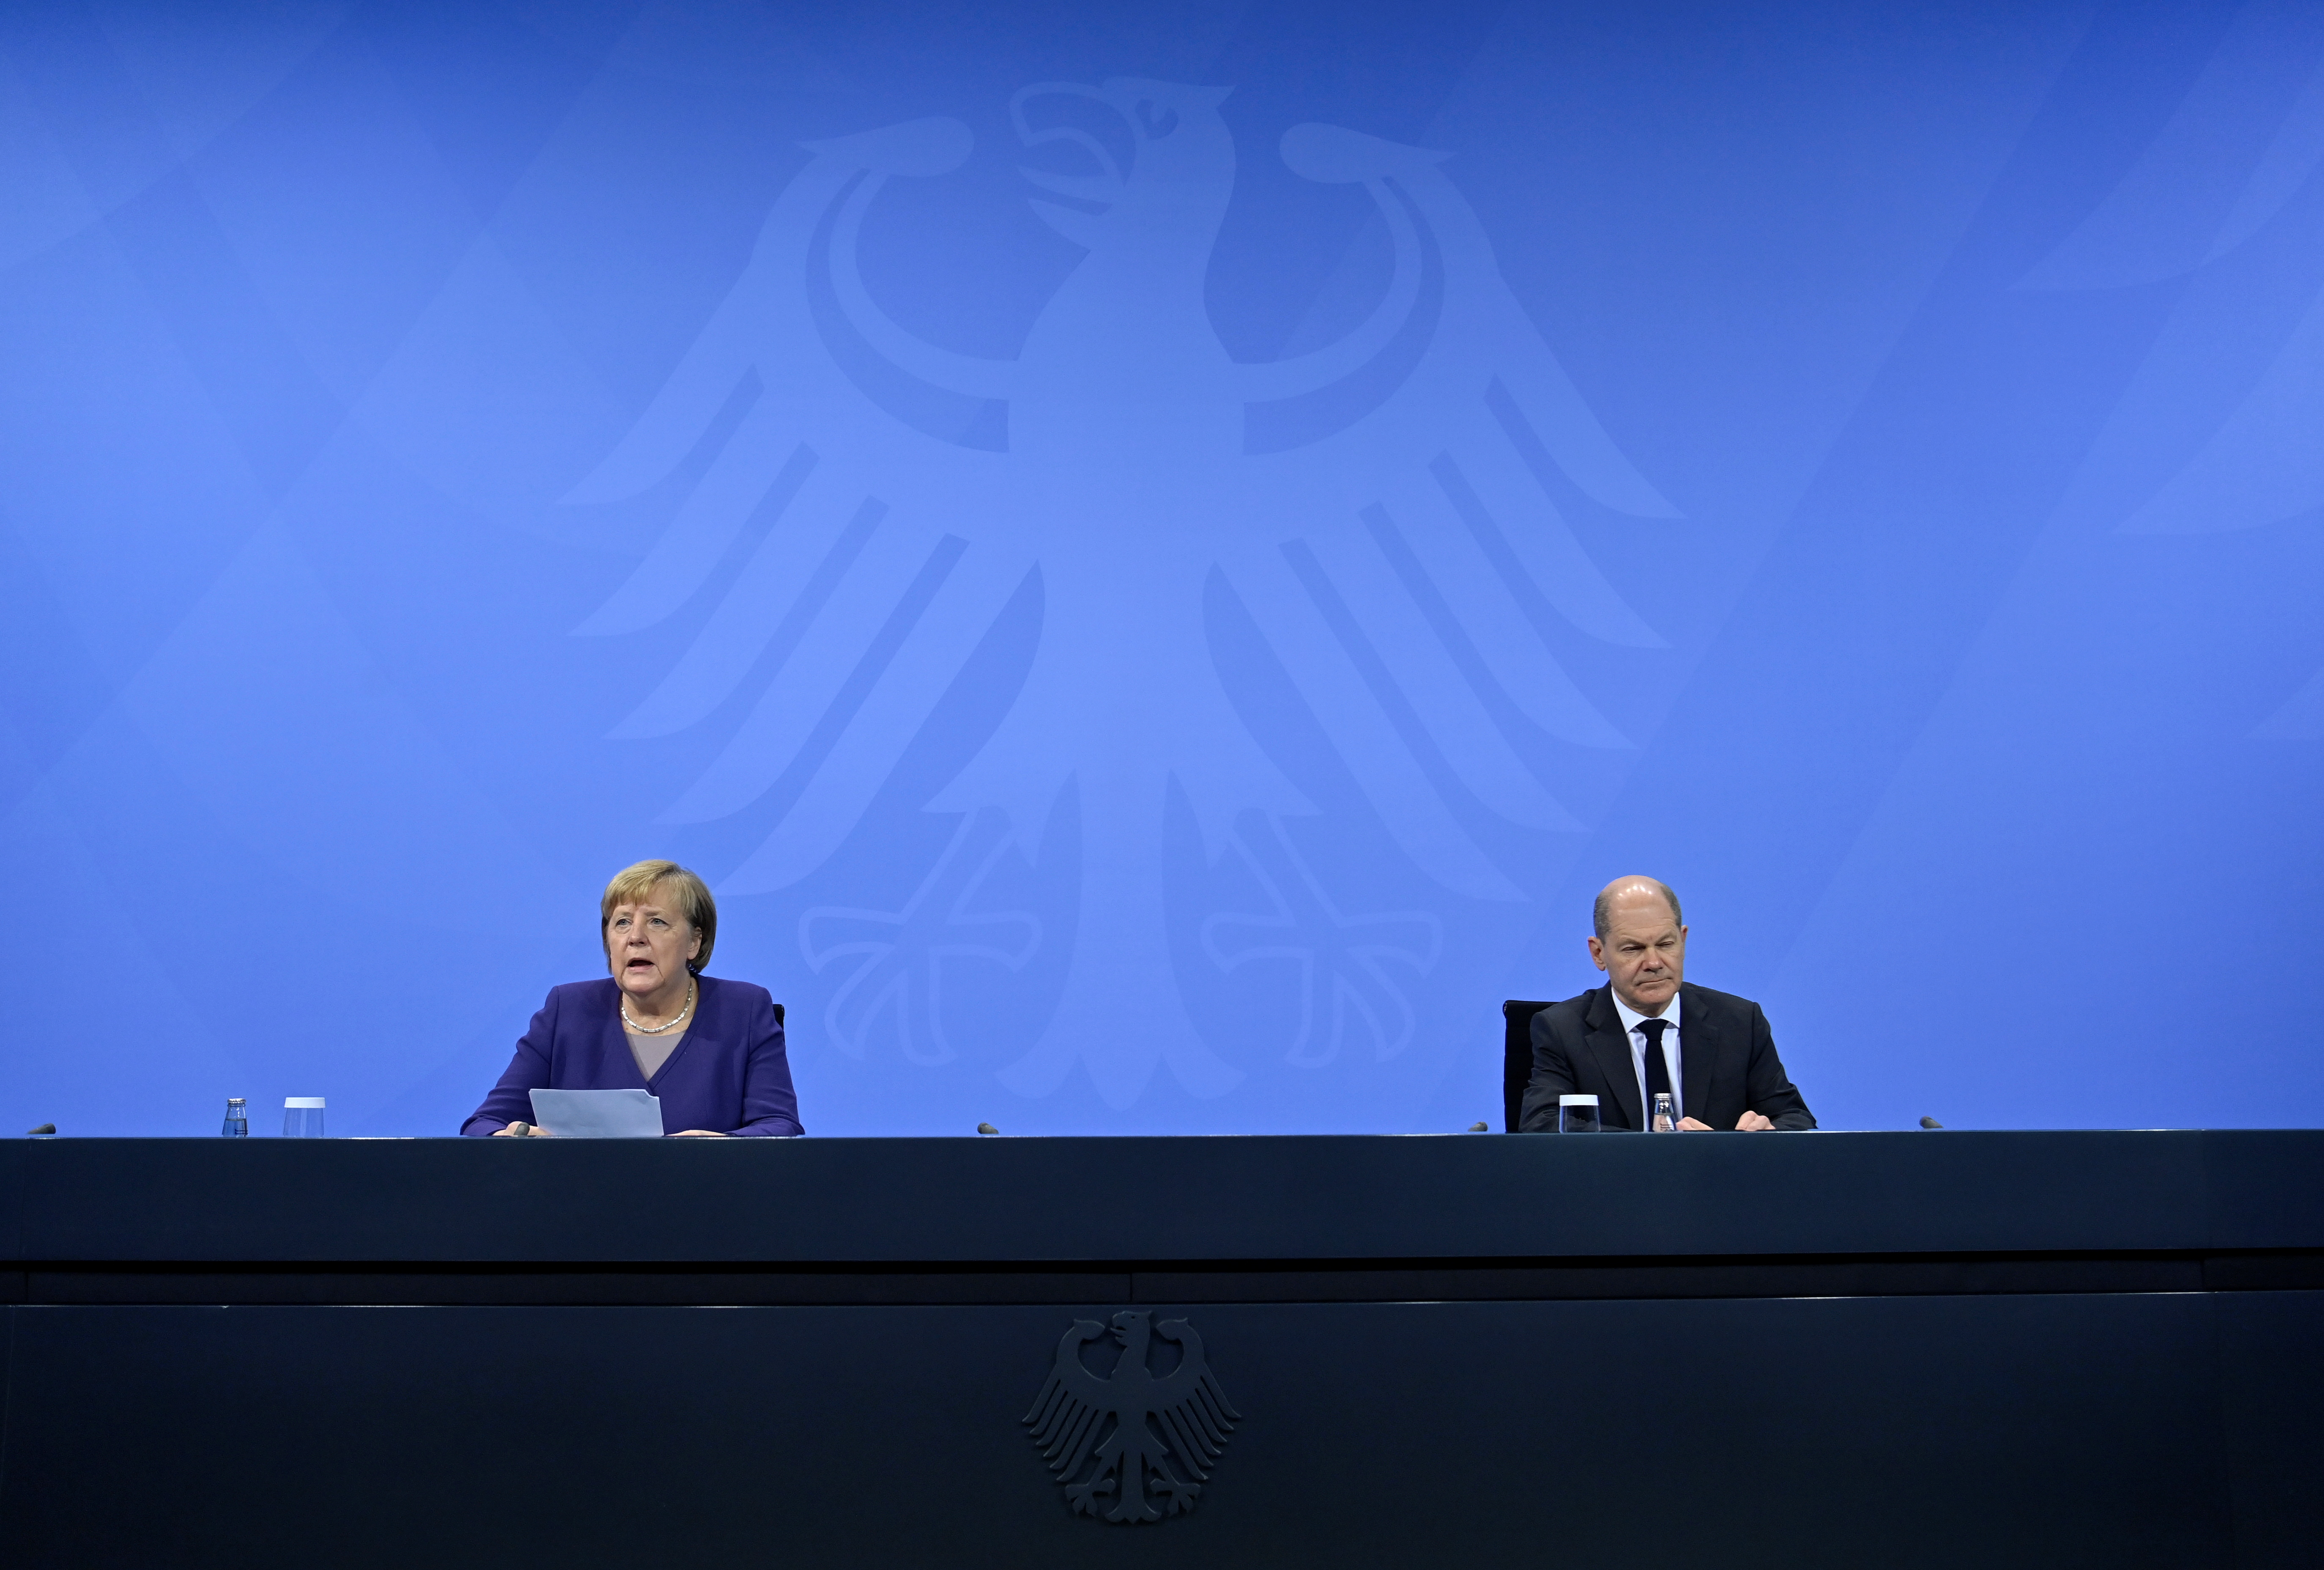 German Chancellor Angela Merkel (L) and her designated successor Olaf Scholz (R) address a press conference following a meeting with the heads of government of Germany's federal states at the Chancellery in Berlin, Germany December 2, 2021. 